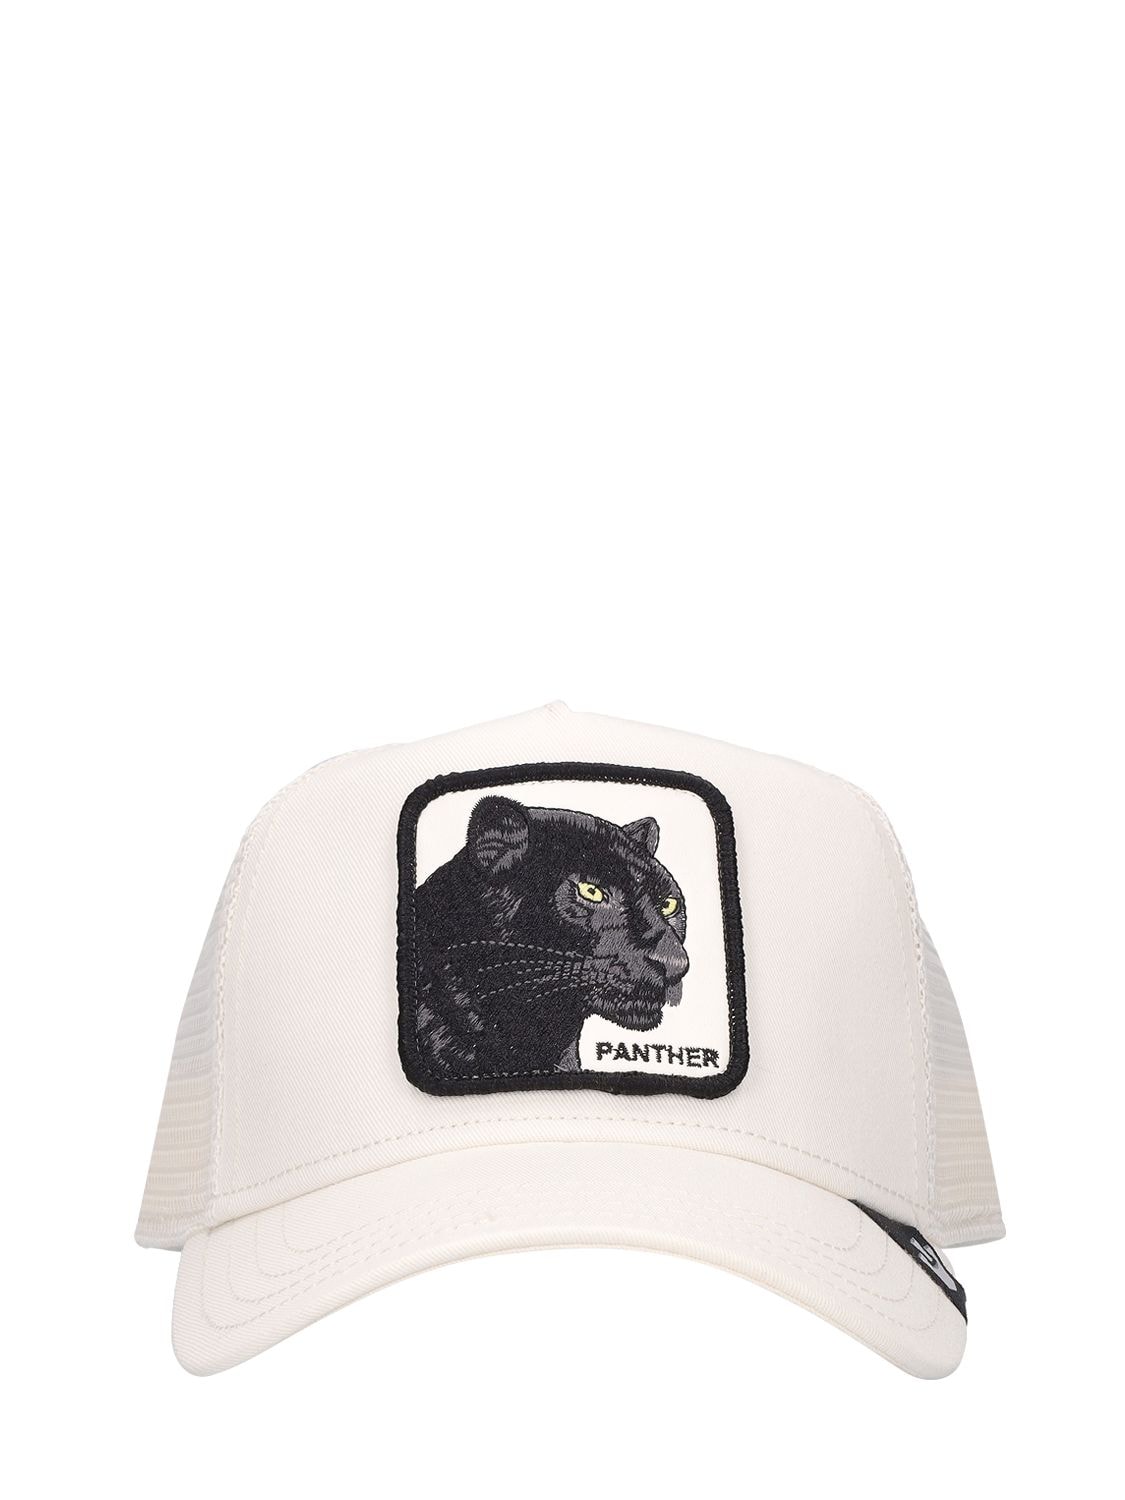 GOORIN BROS THE PANTHER TRUCKER HAT W/PATCH